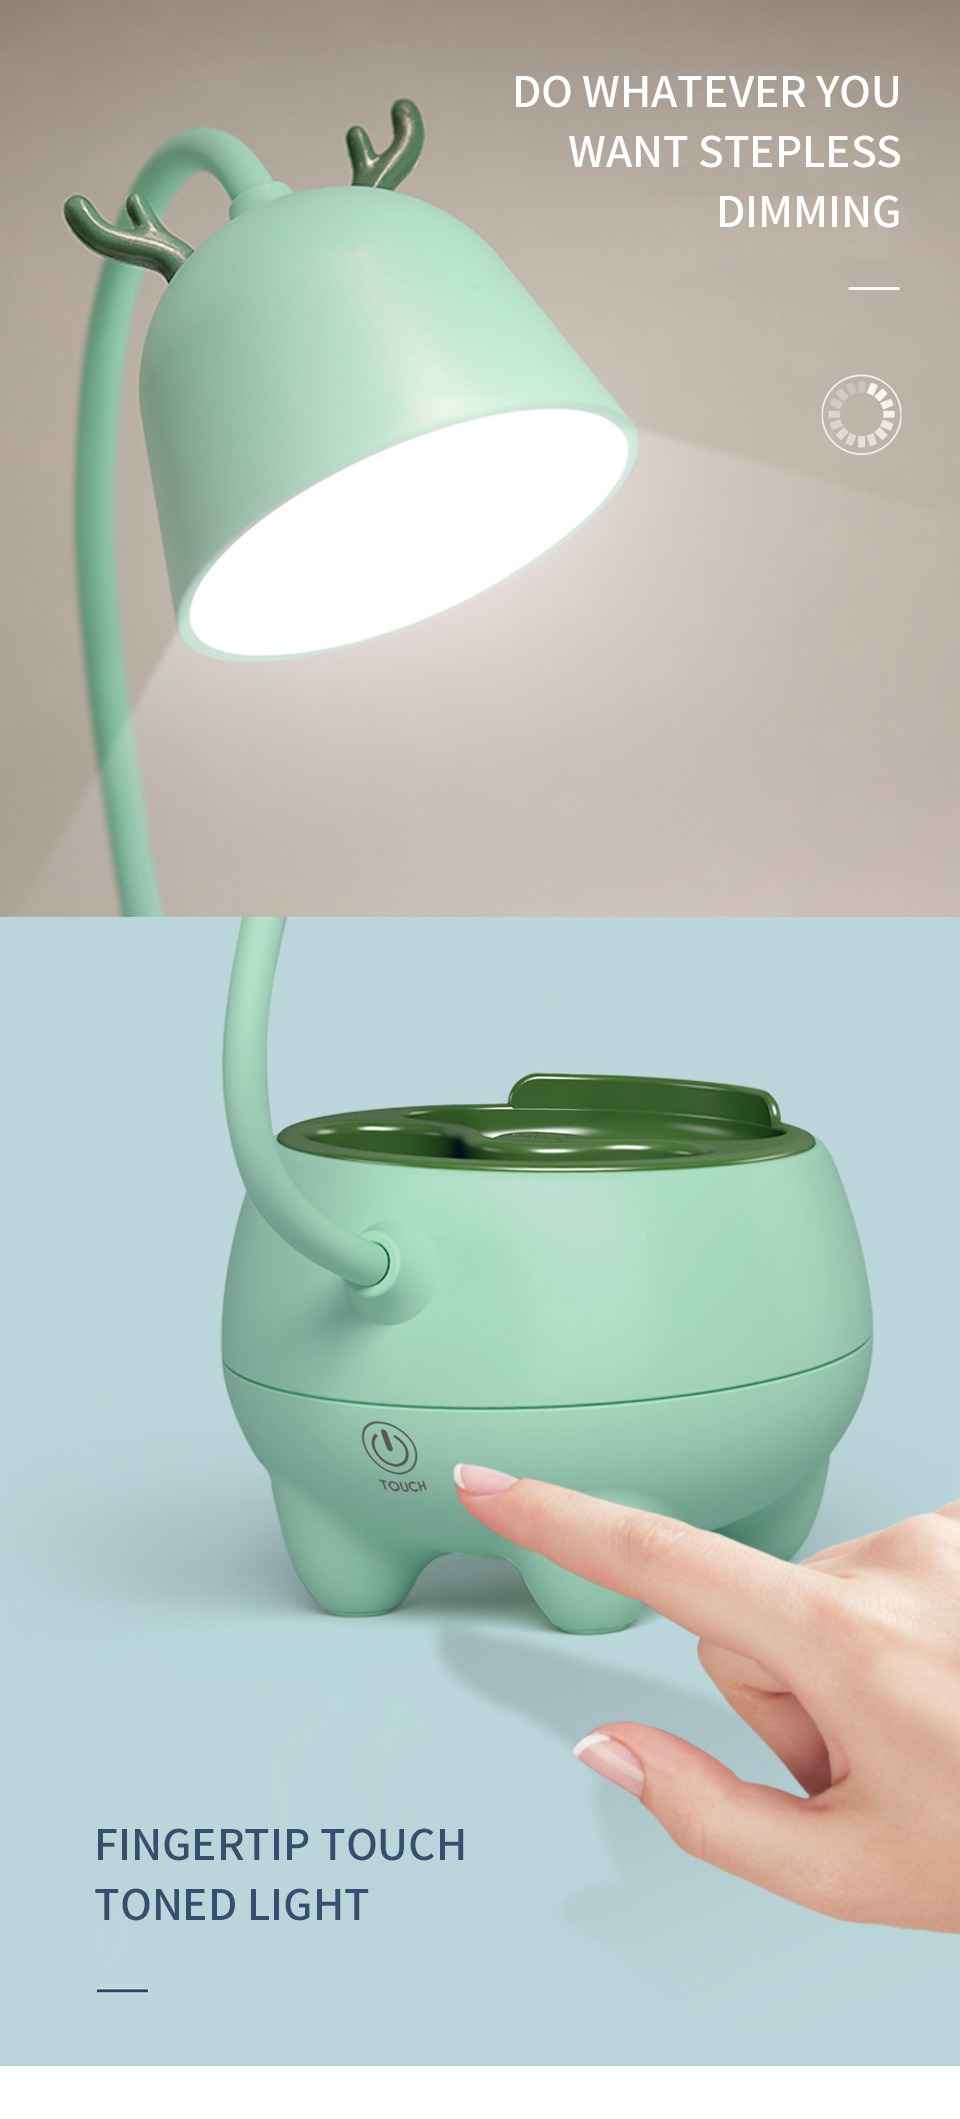 Givelong LED Pet Table Lamp price in bd